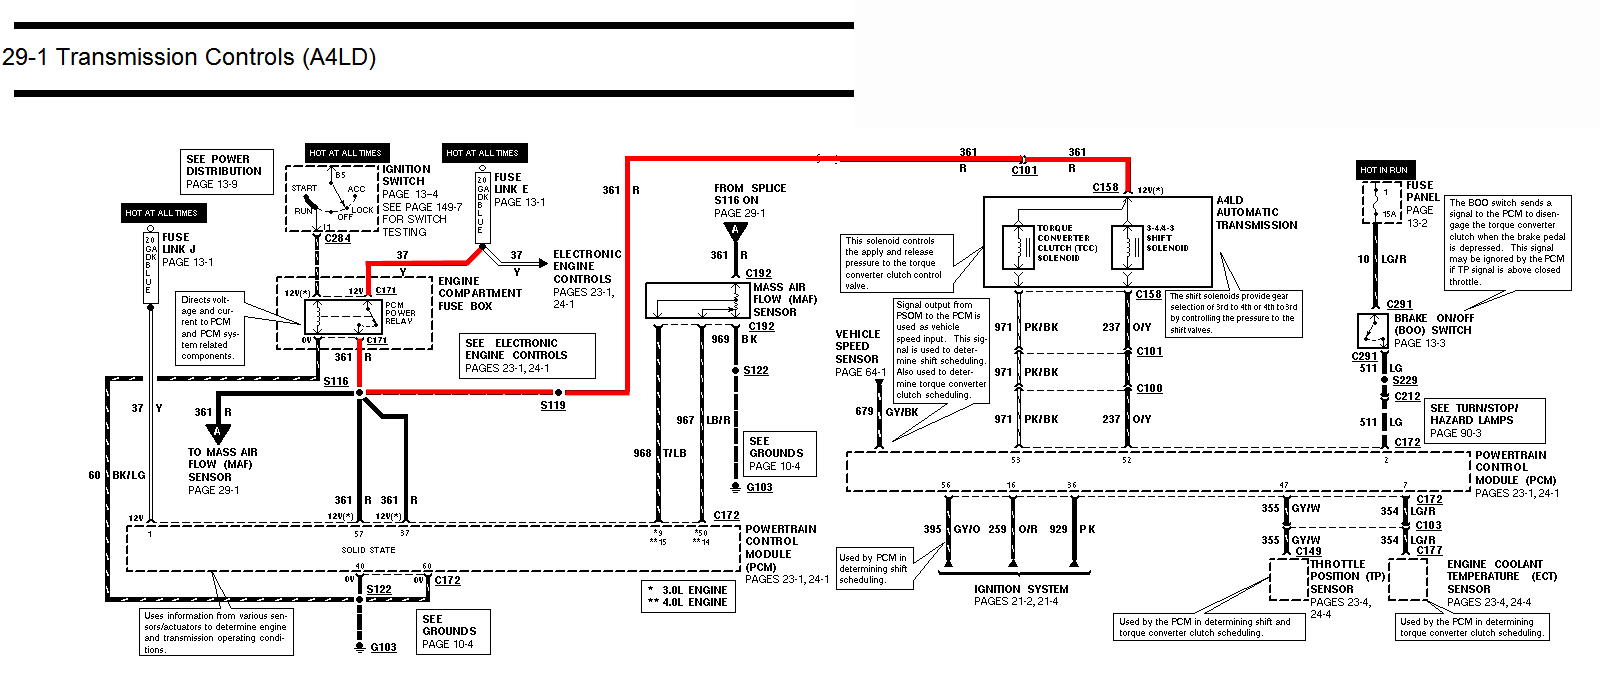 A4Ld Transmission Wiring Diagram | Wiring Library - Mercury Outboard Wiring Diagram Ignition Switch